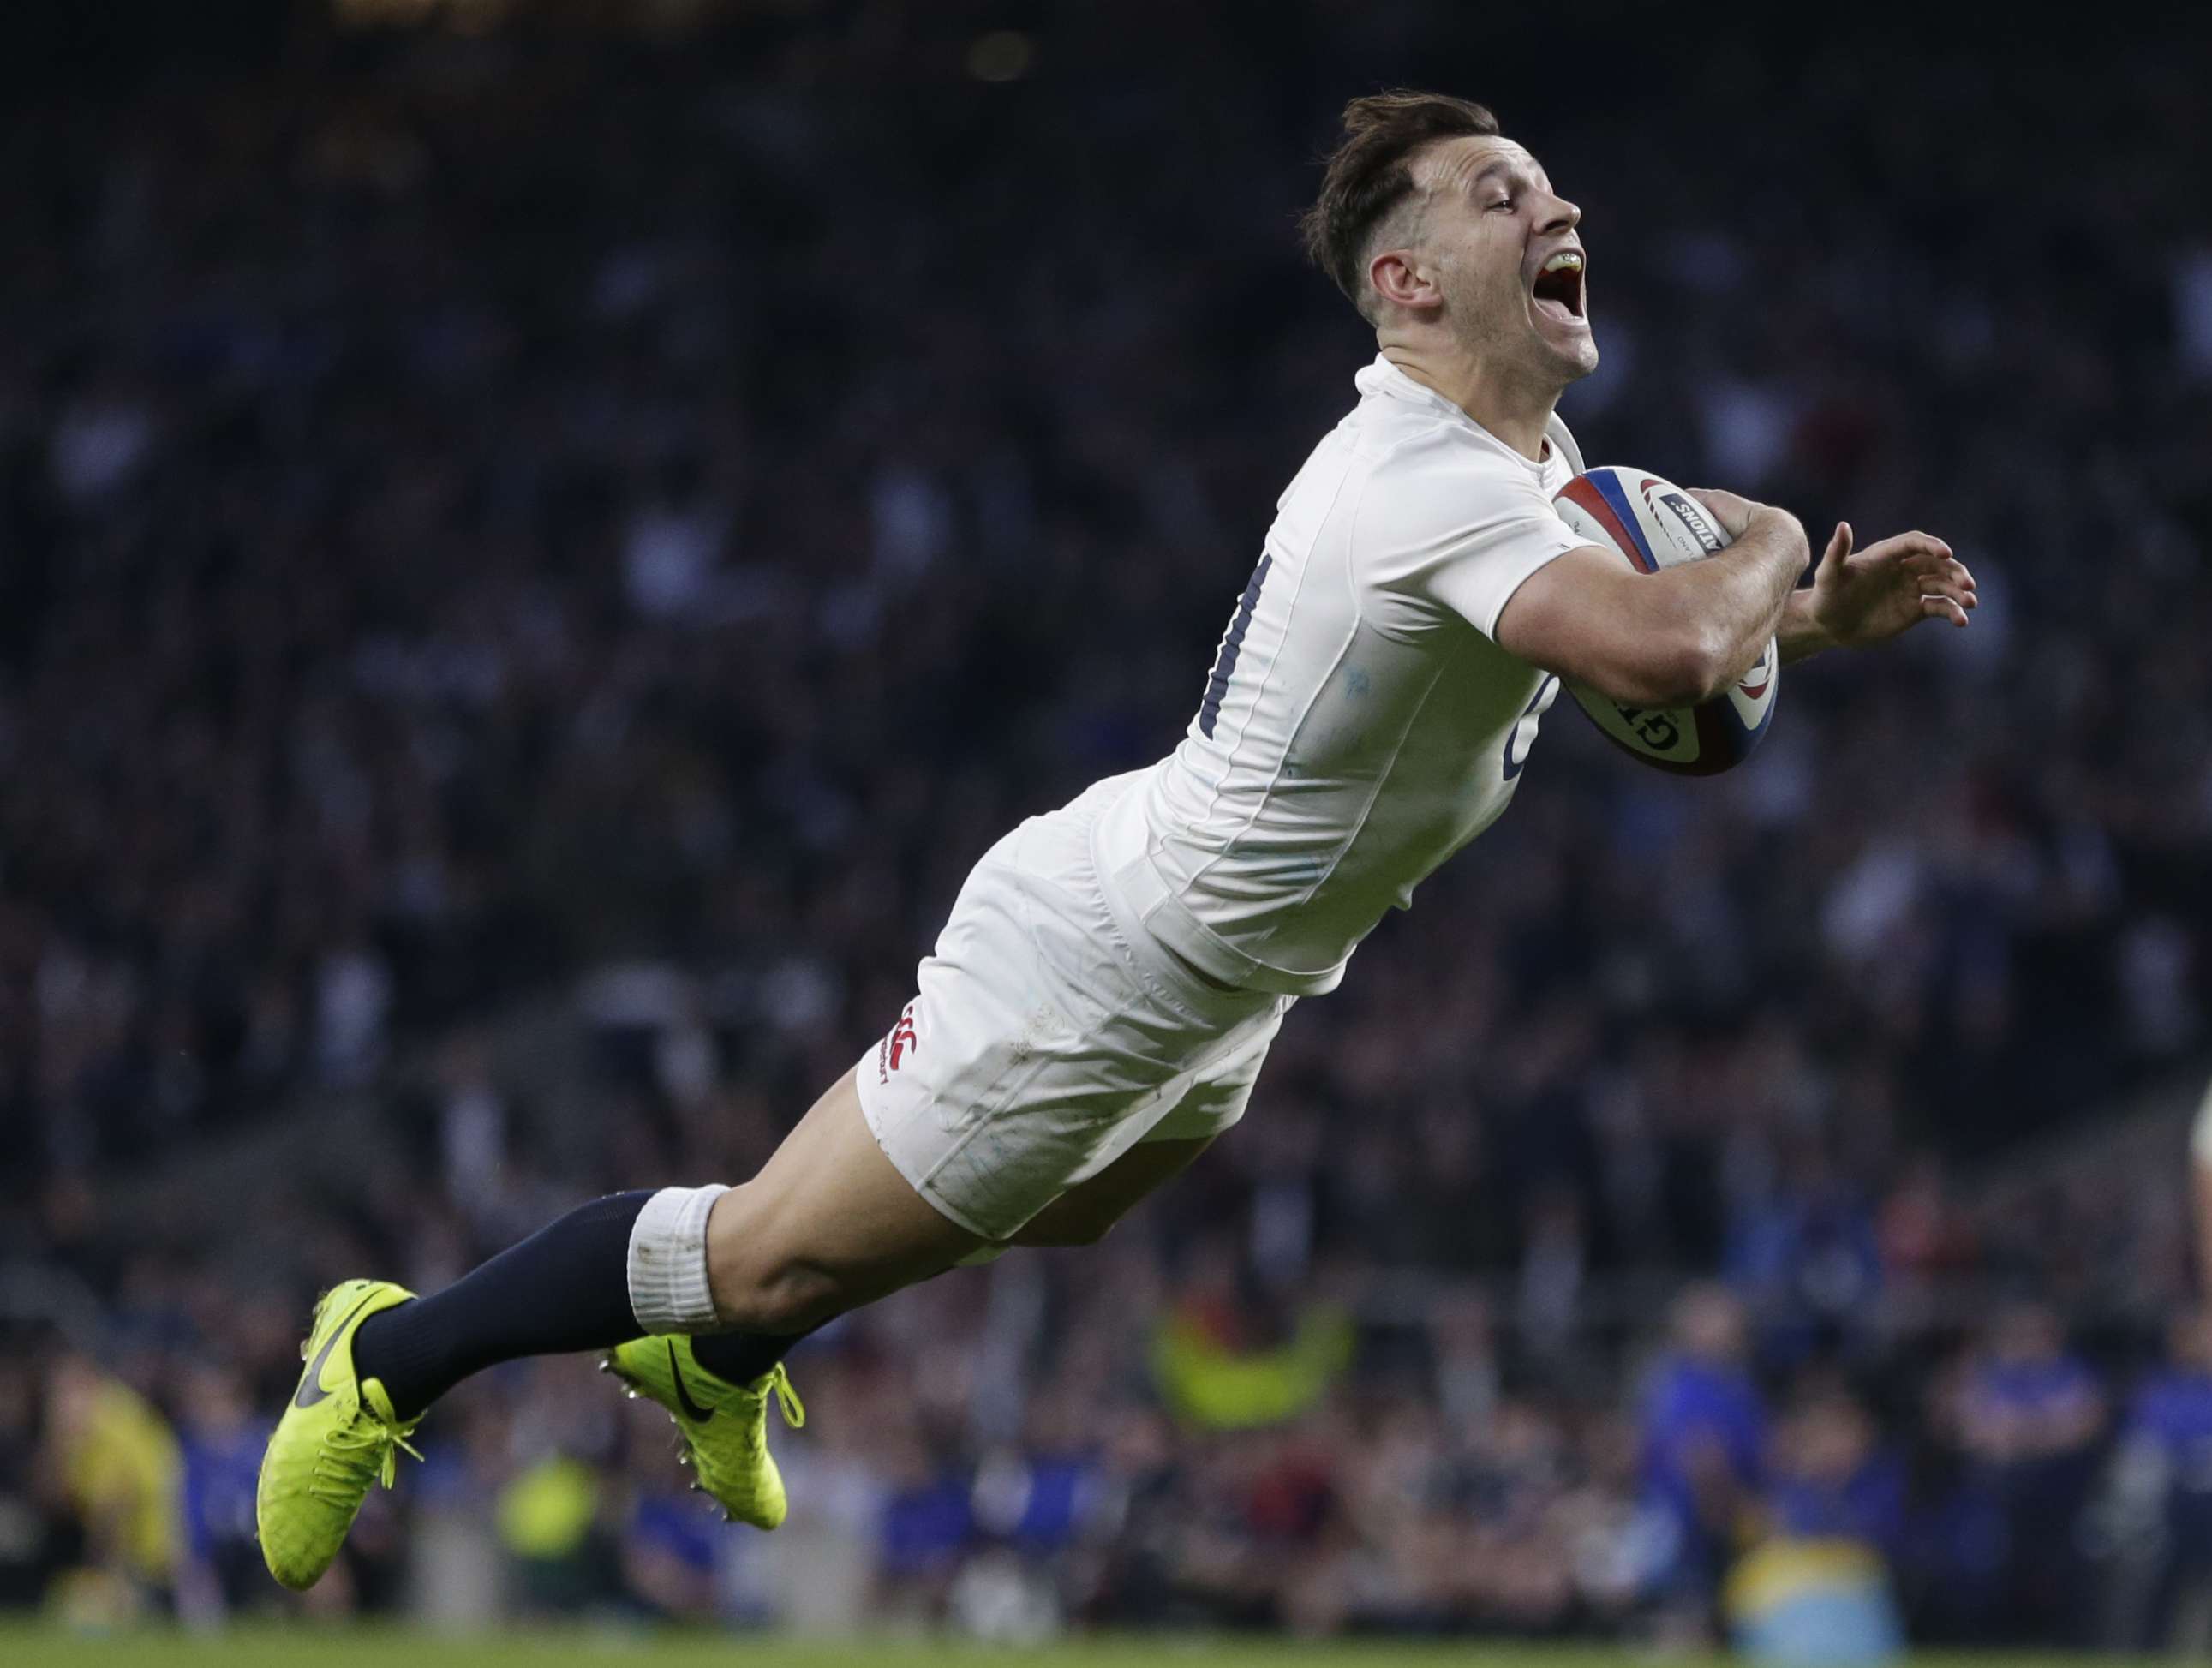 England's Danny Care dives over for a try. Photo: Reuters